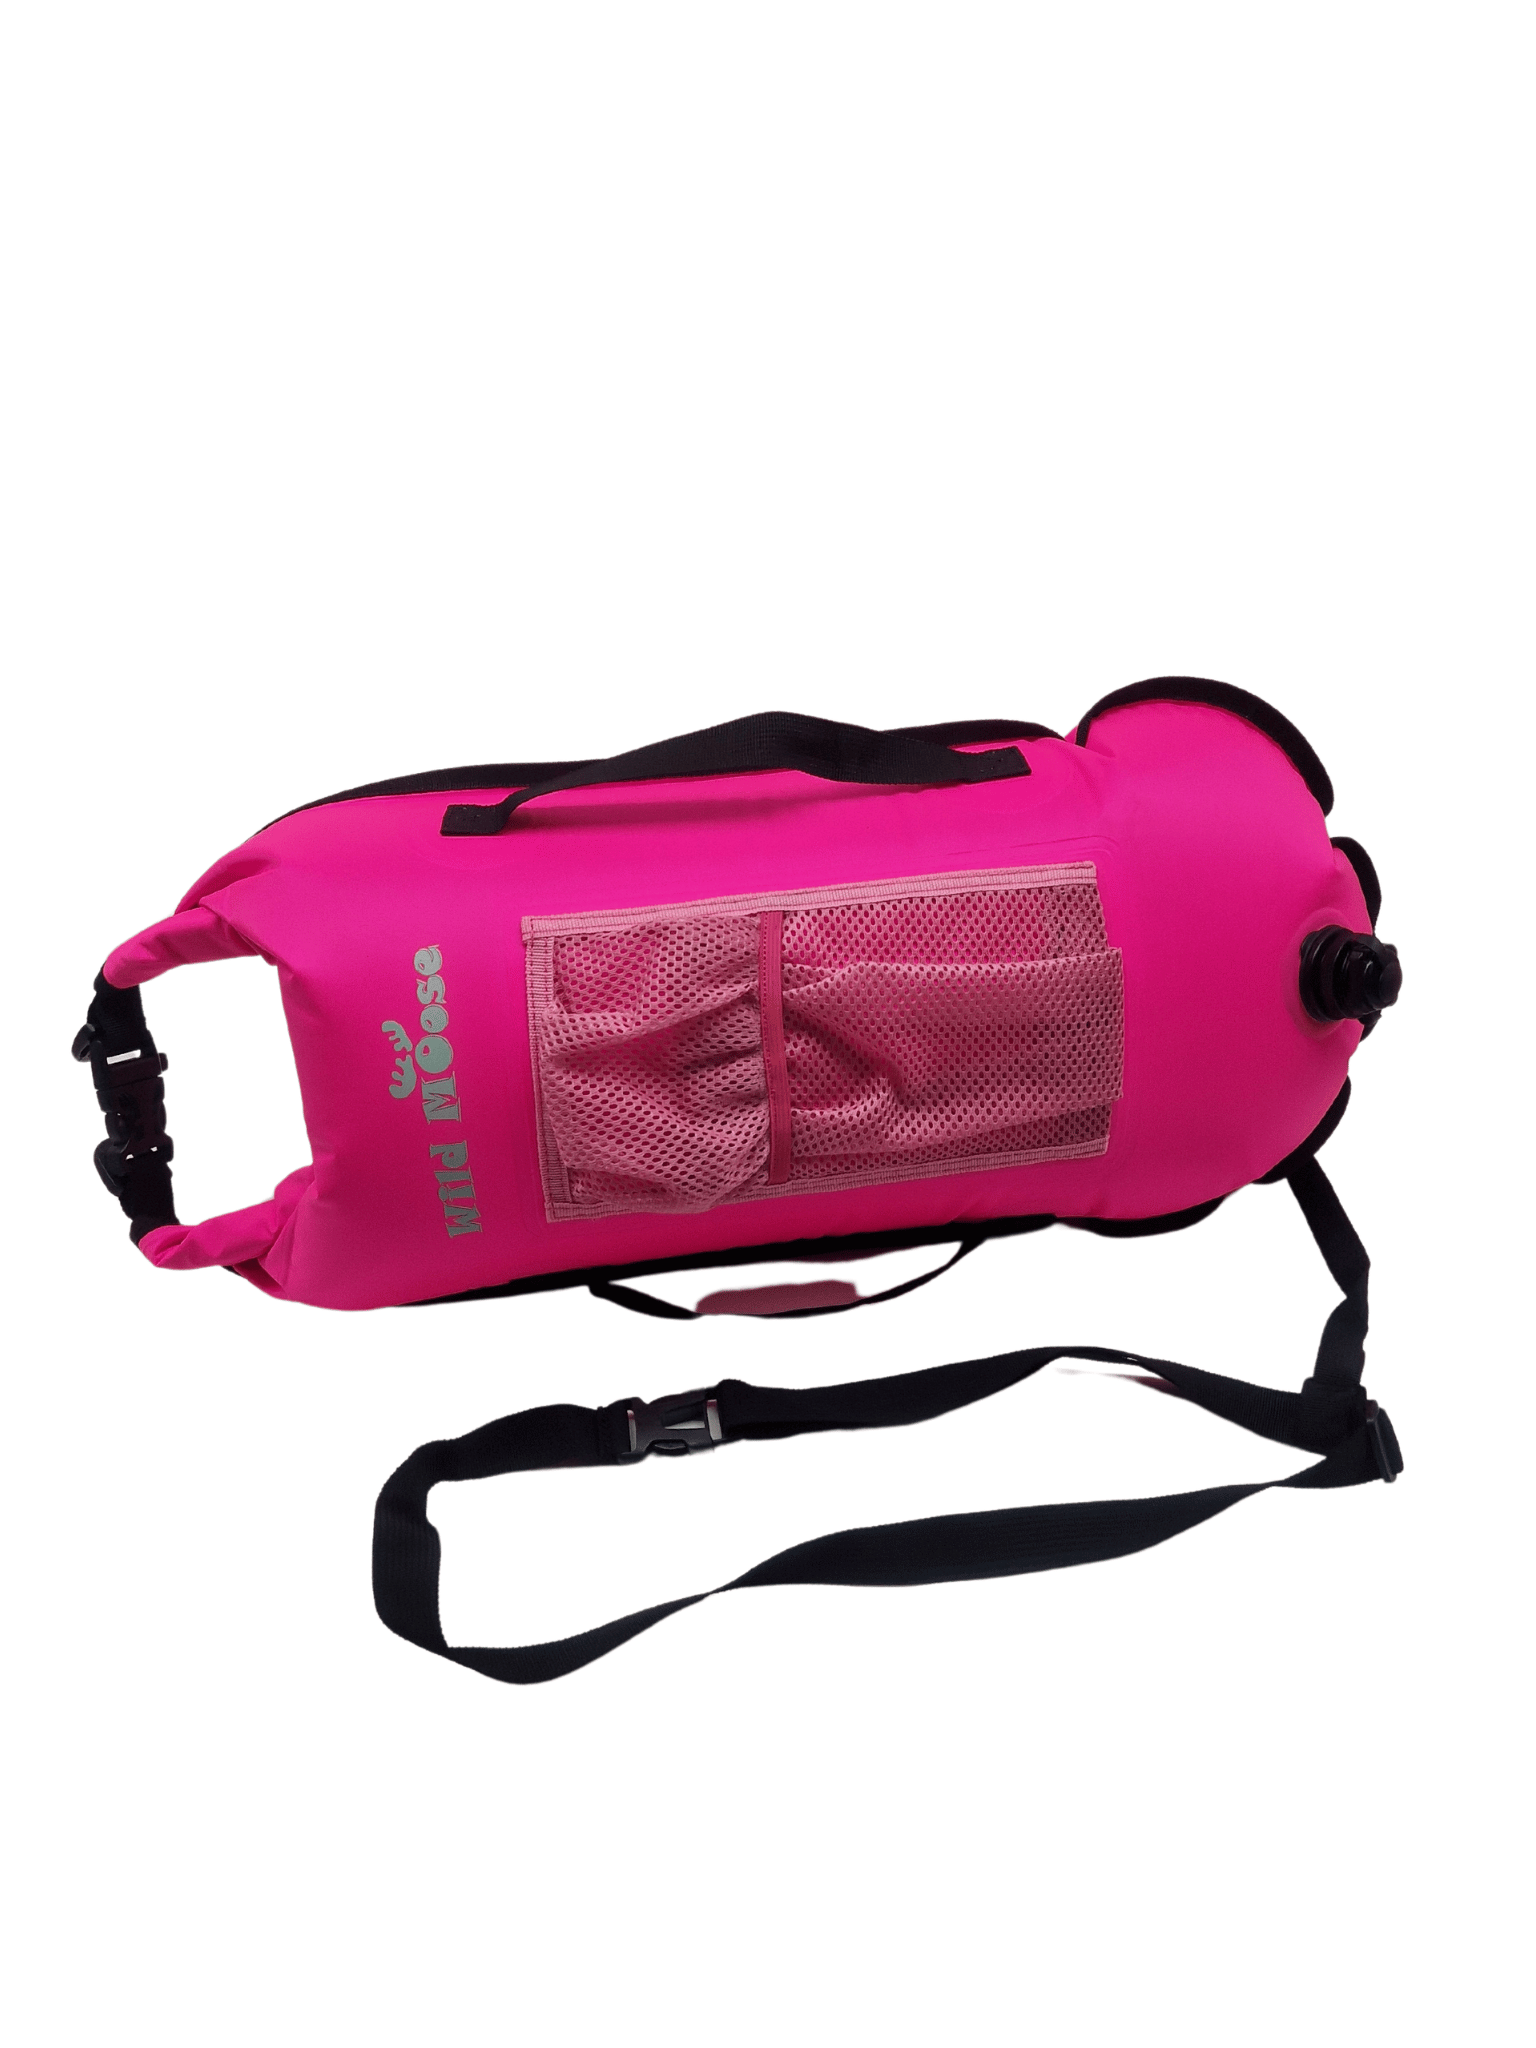 28L bright pink tow float (on side)  with mesh top pocket and black handles and leash